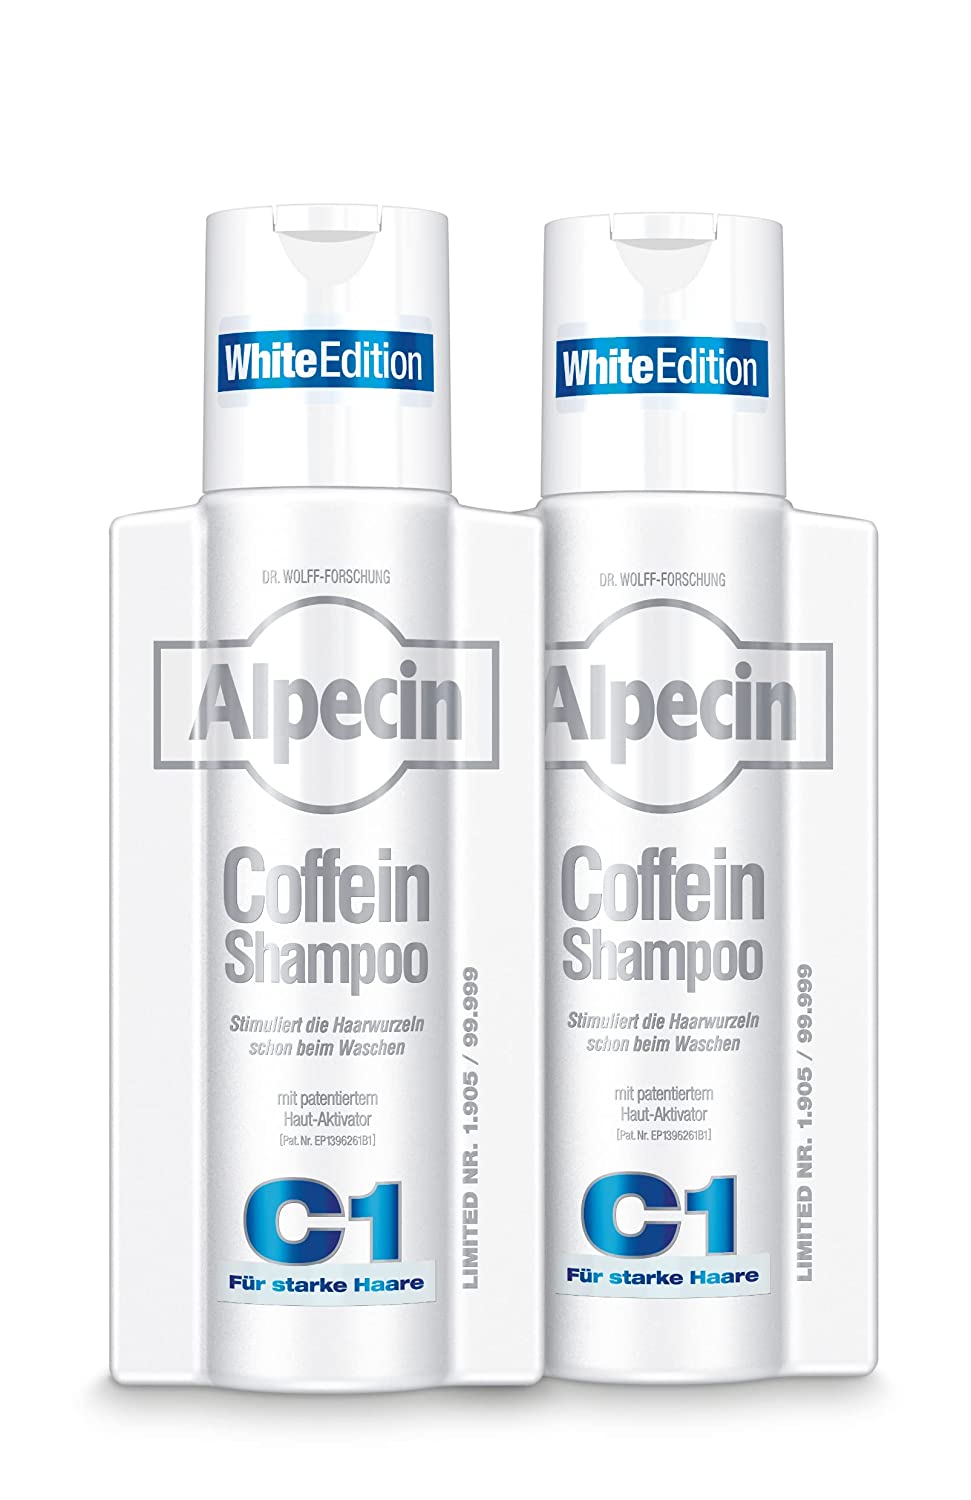 Alpecin Caffeine Shampoo C1 White Edition - 2 x 250 ml - For Strong Hair | Limited Edition with Invigorating Fresh Fragrance | Natural Hair Growth & Hair Care for Men | Made in Germany